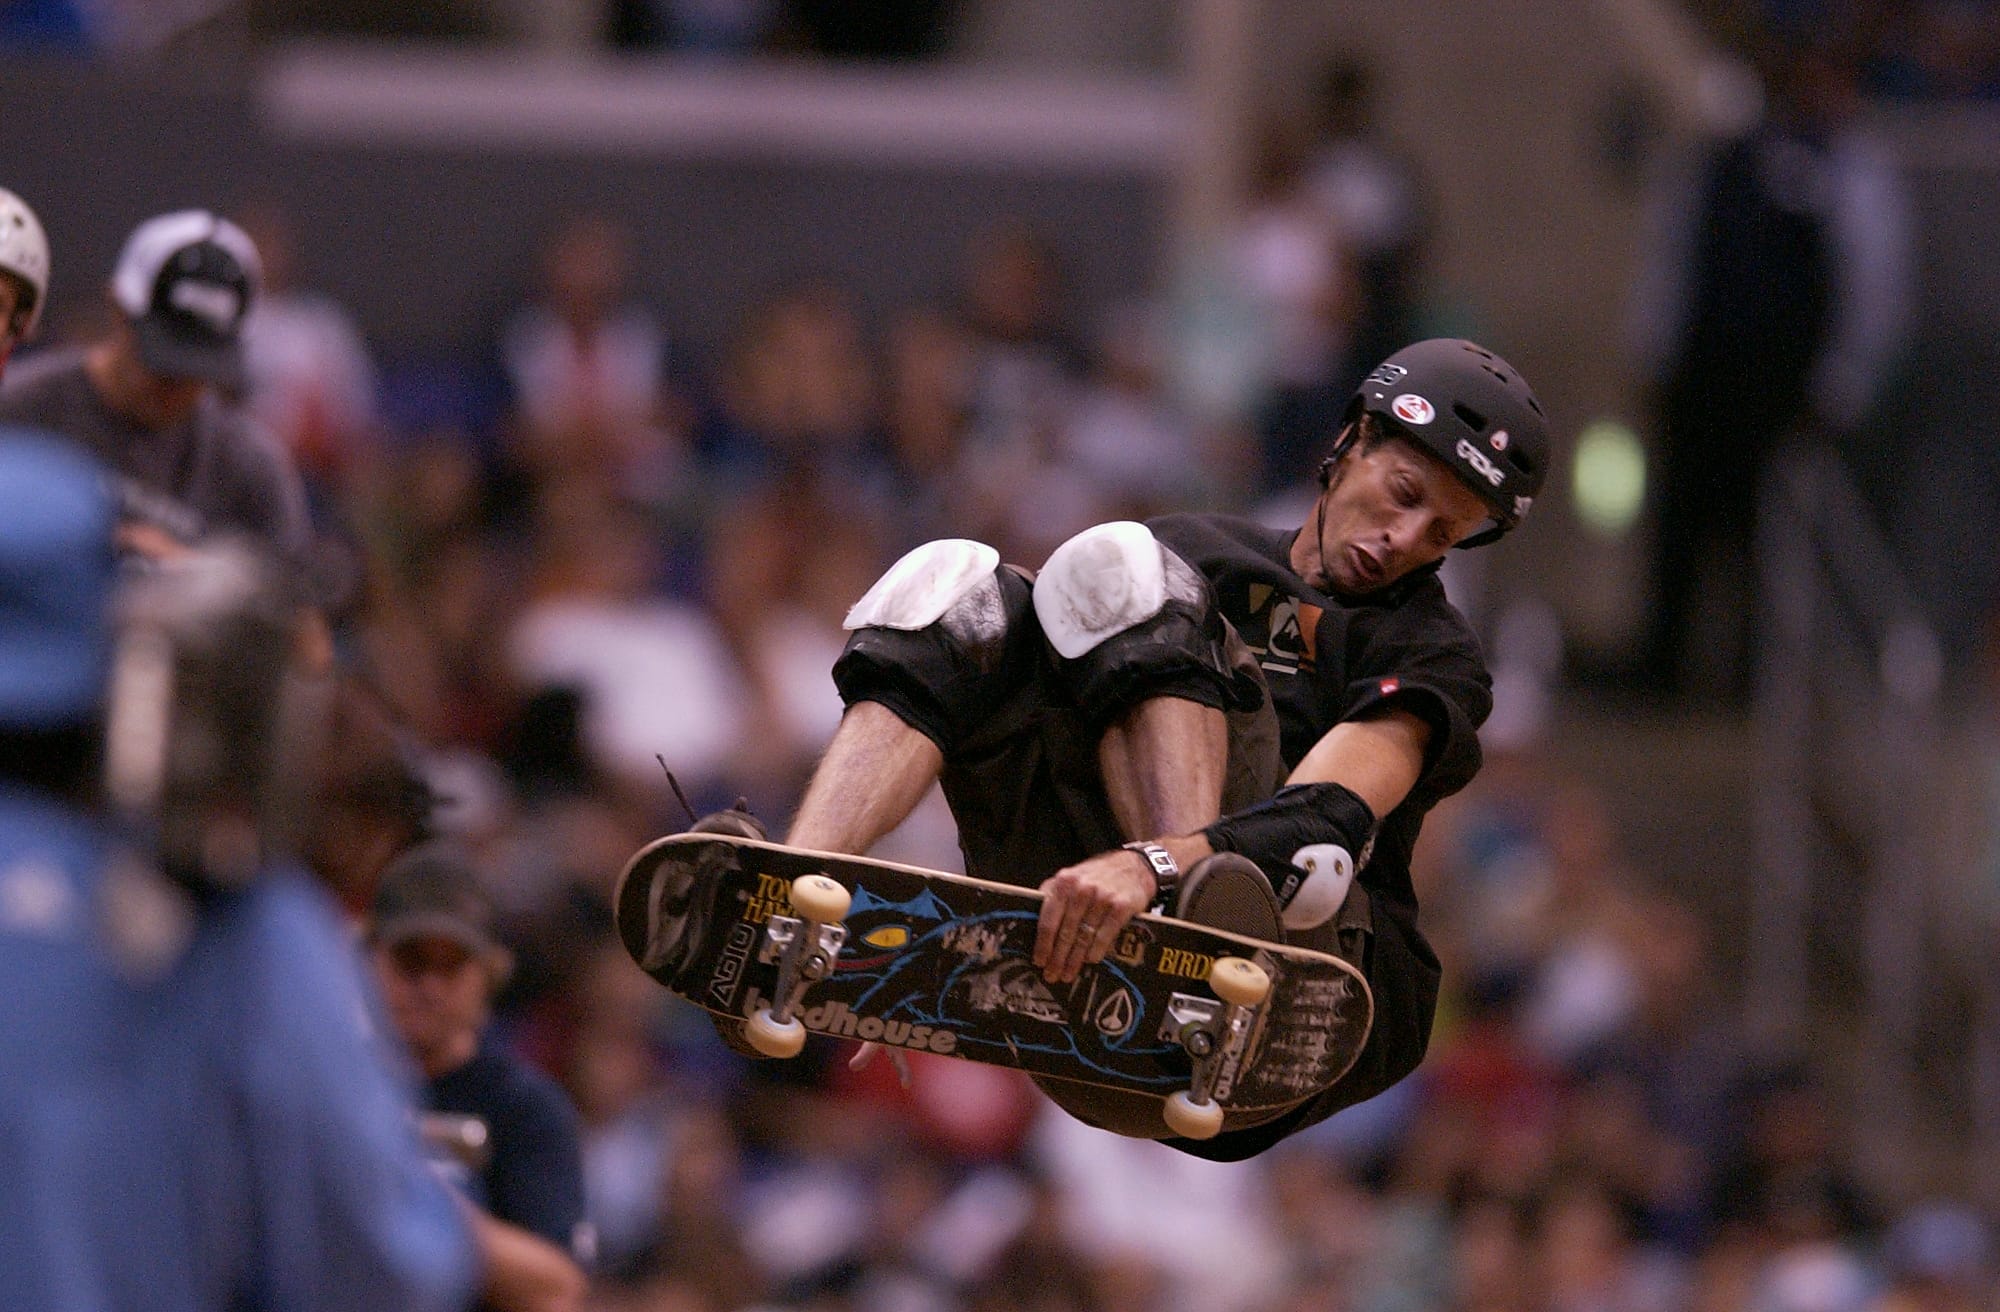 How Tony Hawk Skated Past Rookie Business Mistakes on His Ride to Success